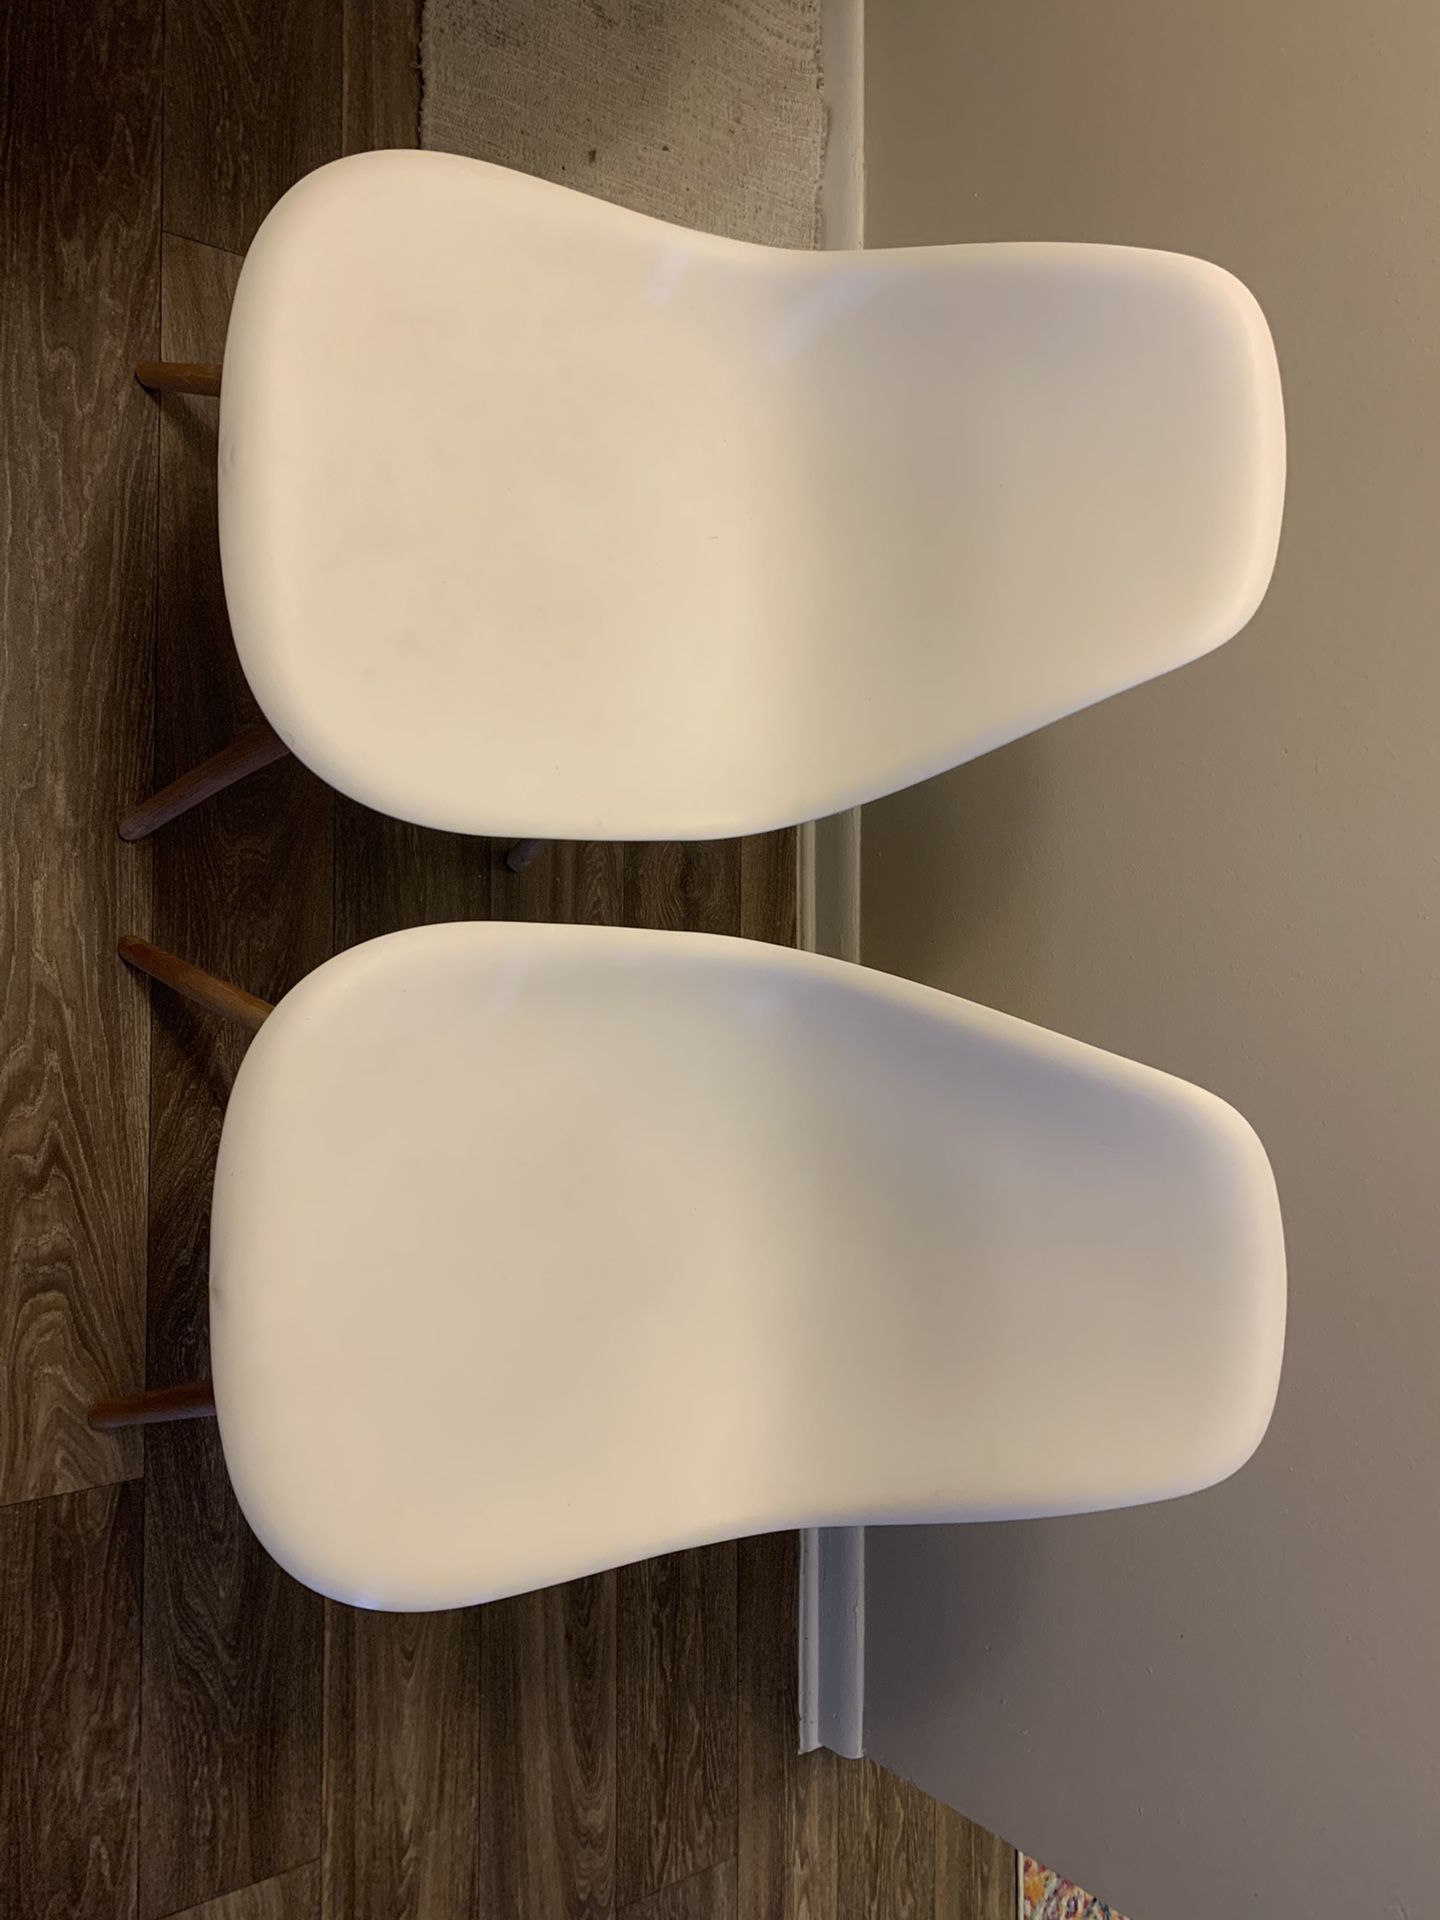 Set of 4 white ikea chairs with wooden legs